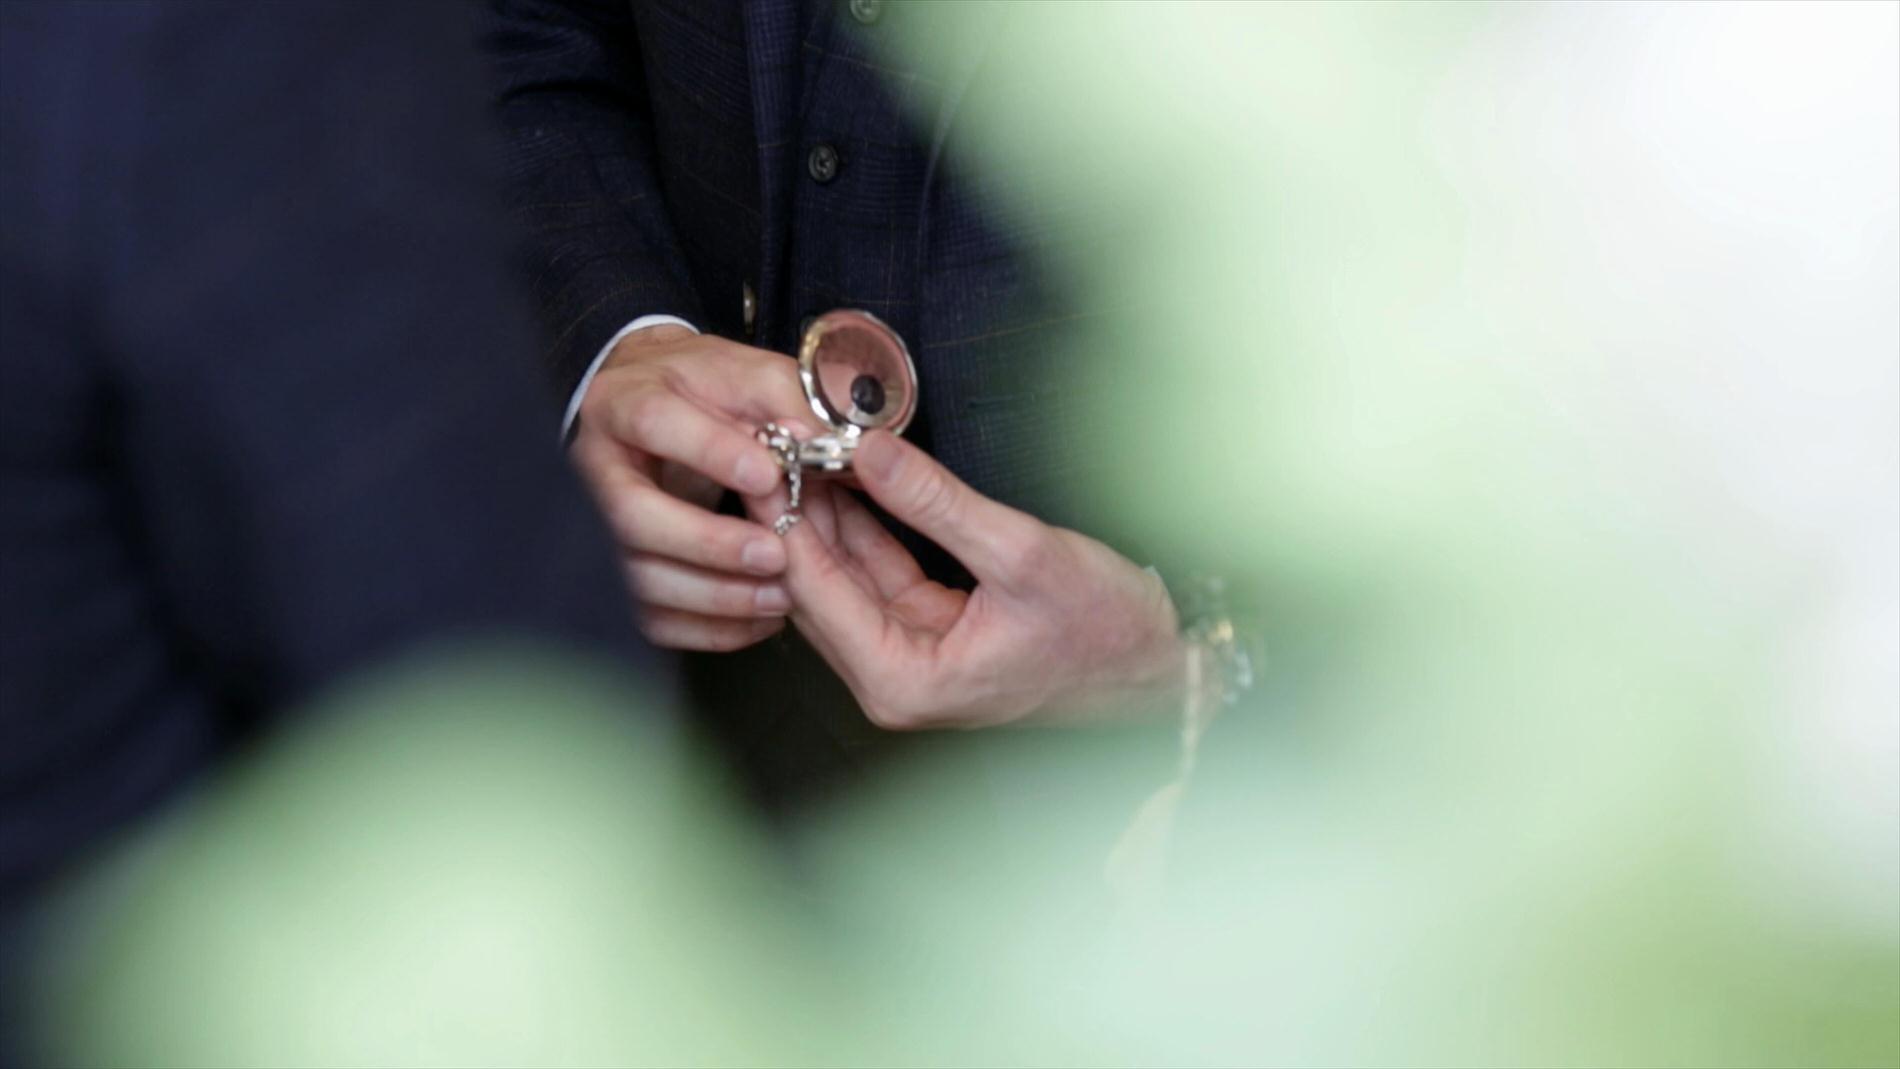 video still of Groom sneaking a look at pocket watch